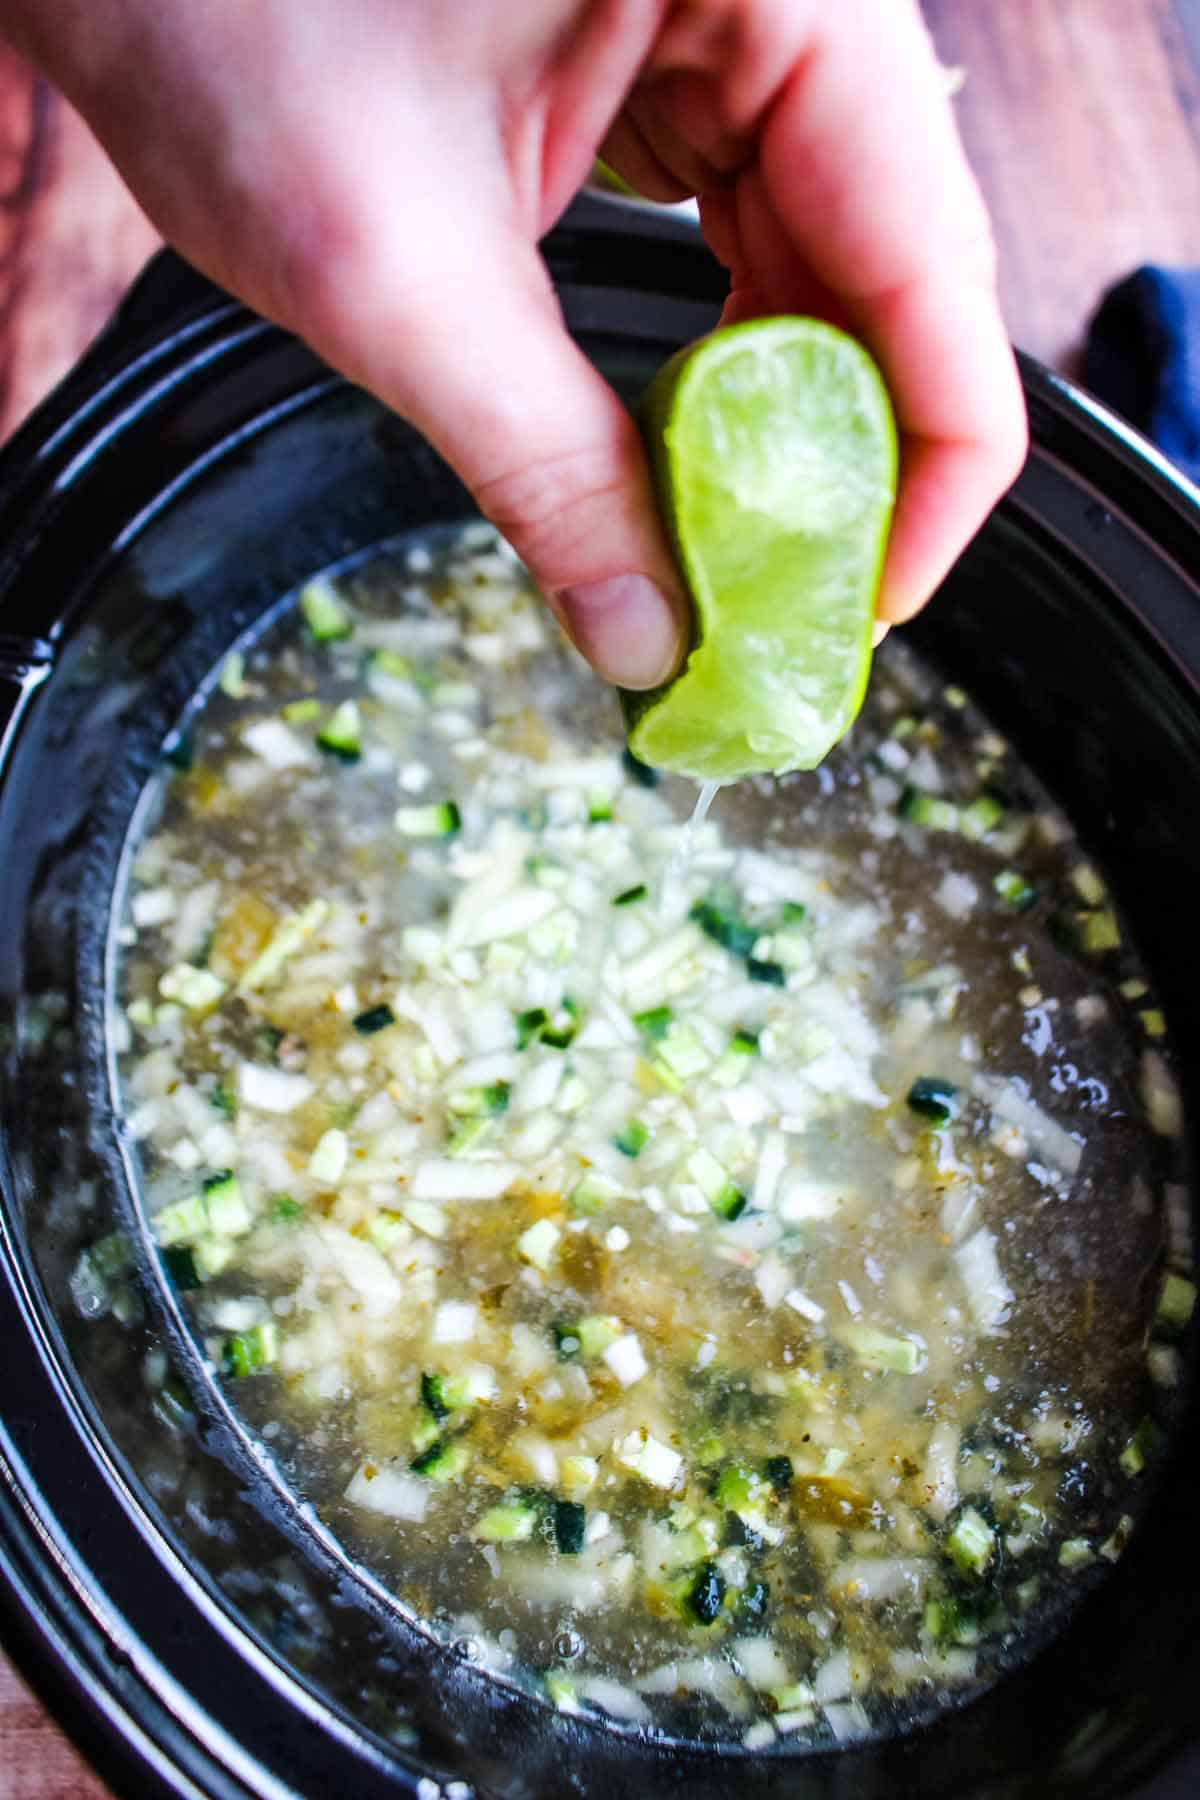 Squeezing lime juice into the slow cooker.